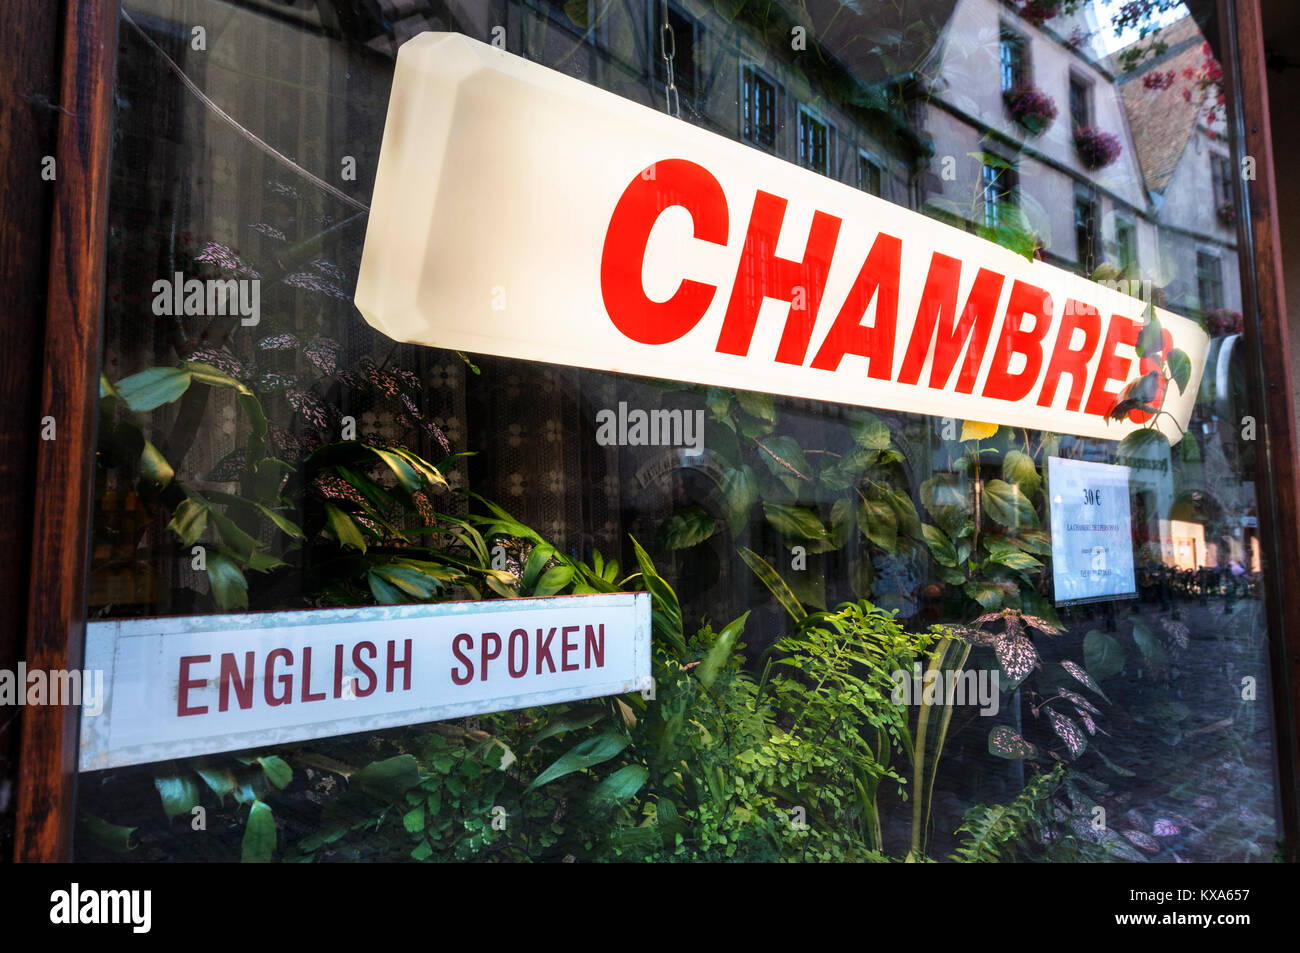 FRENCH B&B 'Chambres' Gite sign in French window with ‘English Spoken’ label alongside Stock Photo